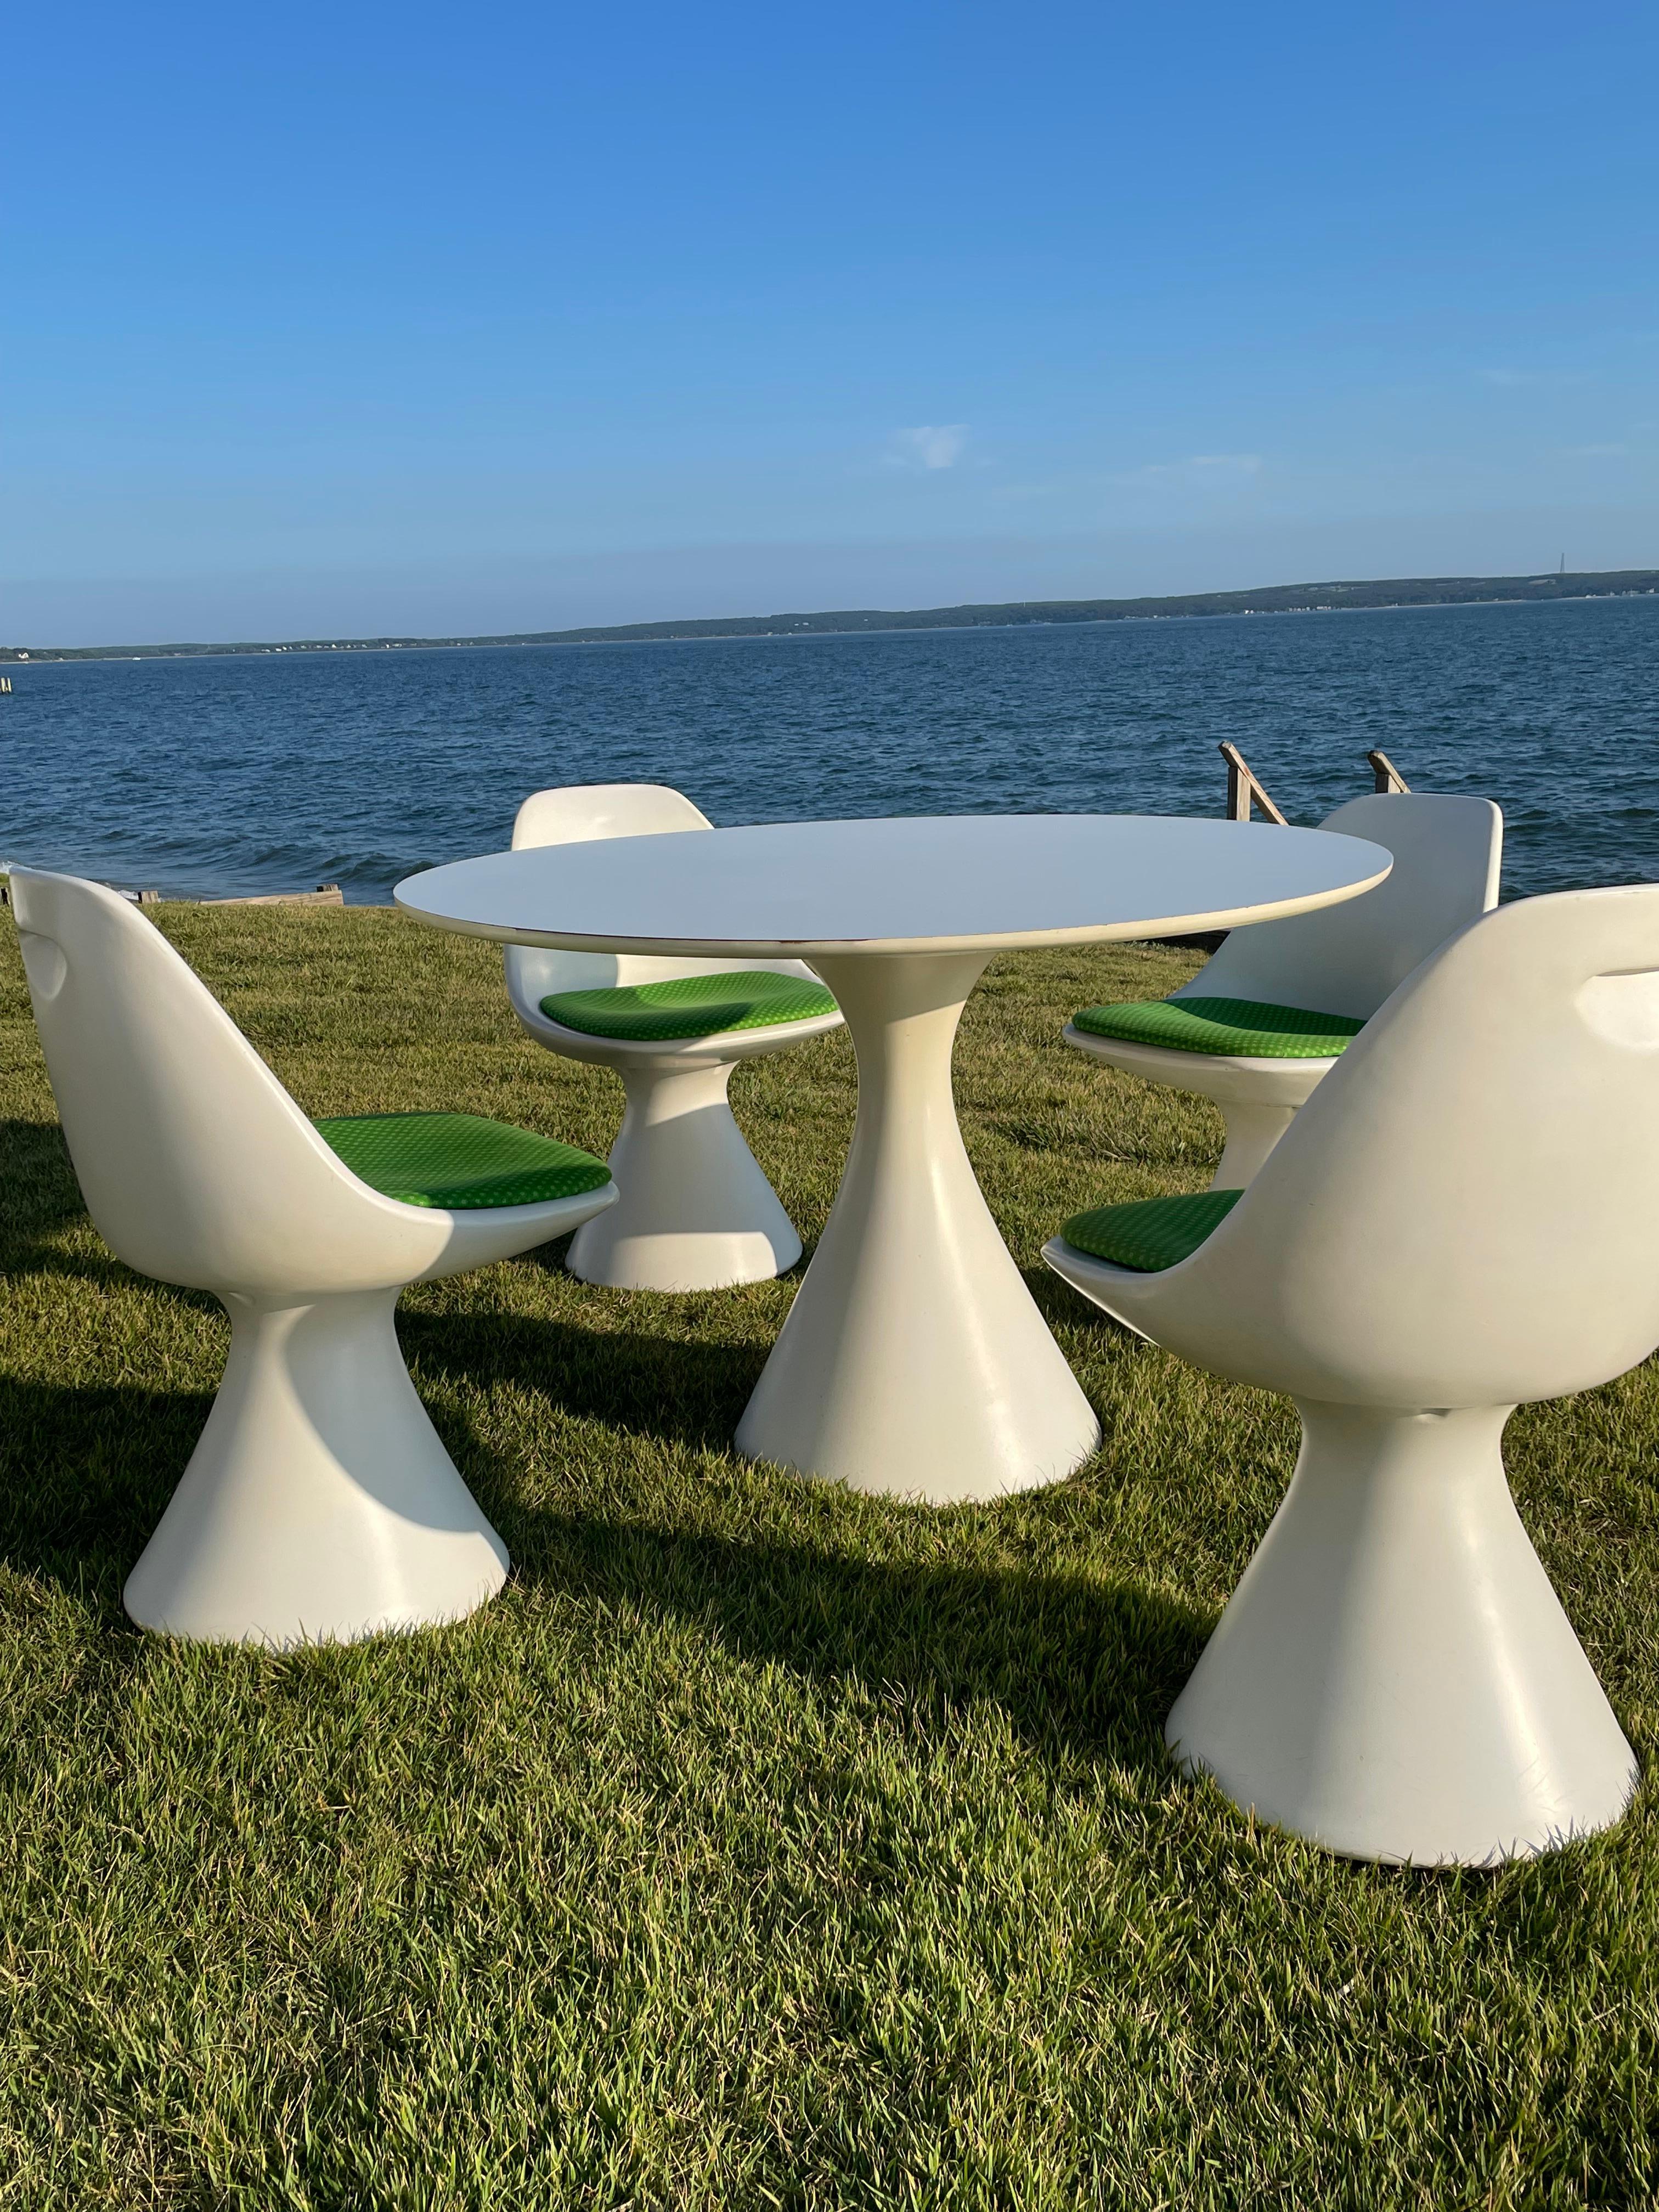 Fabulous Mid Century Dining Set. The Mushroom Collection by Hollen, Inc circa 60s/70s has four white molded swivel chairs with a groovy green seat pad and matching table . All original, great condition. There is a minor surface mark on one chair.
